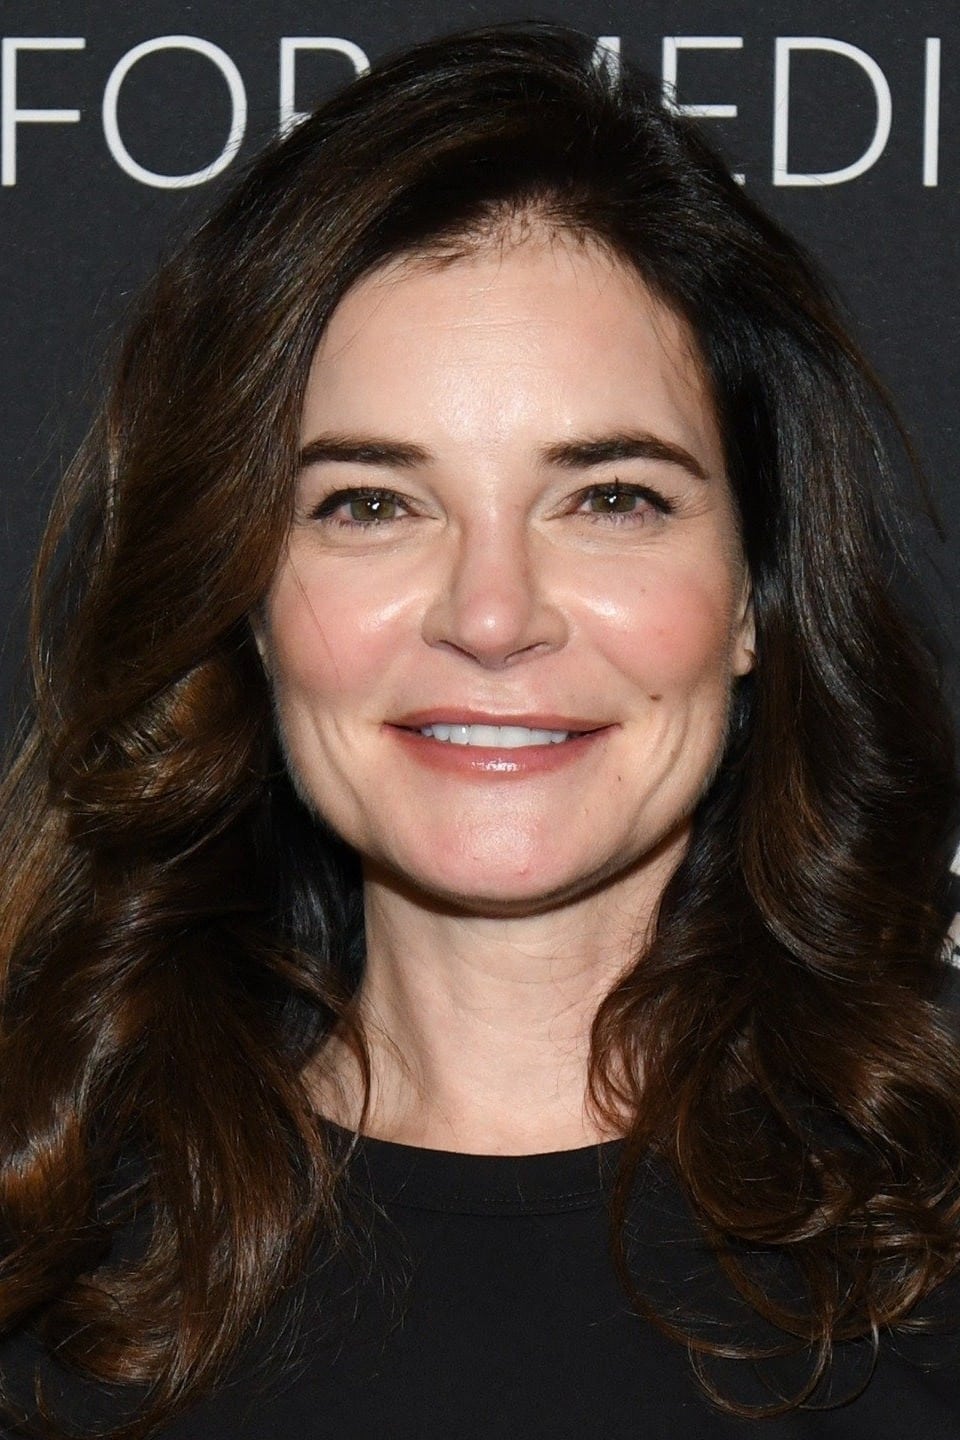 Betsy brandt young